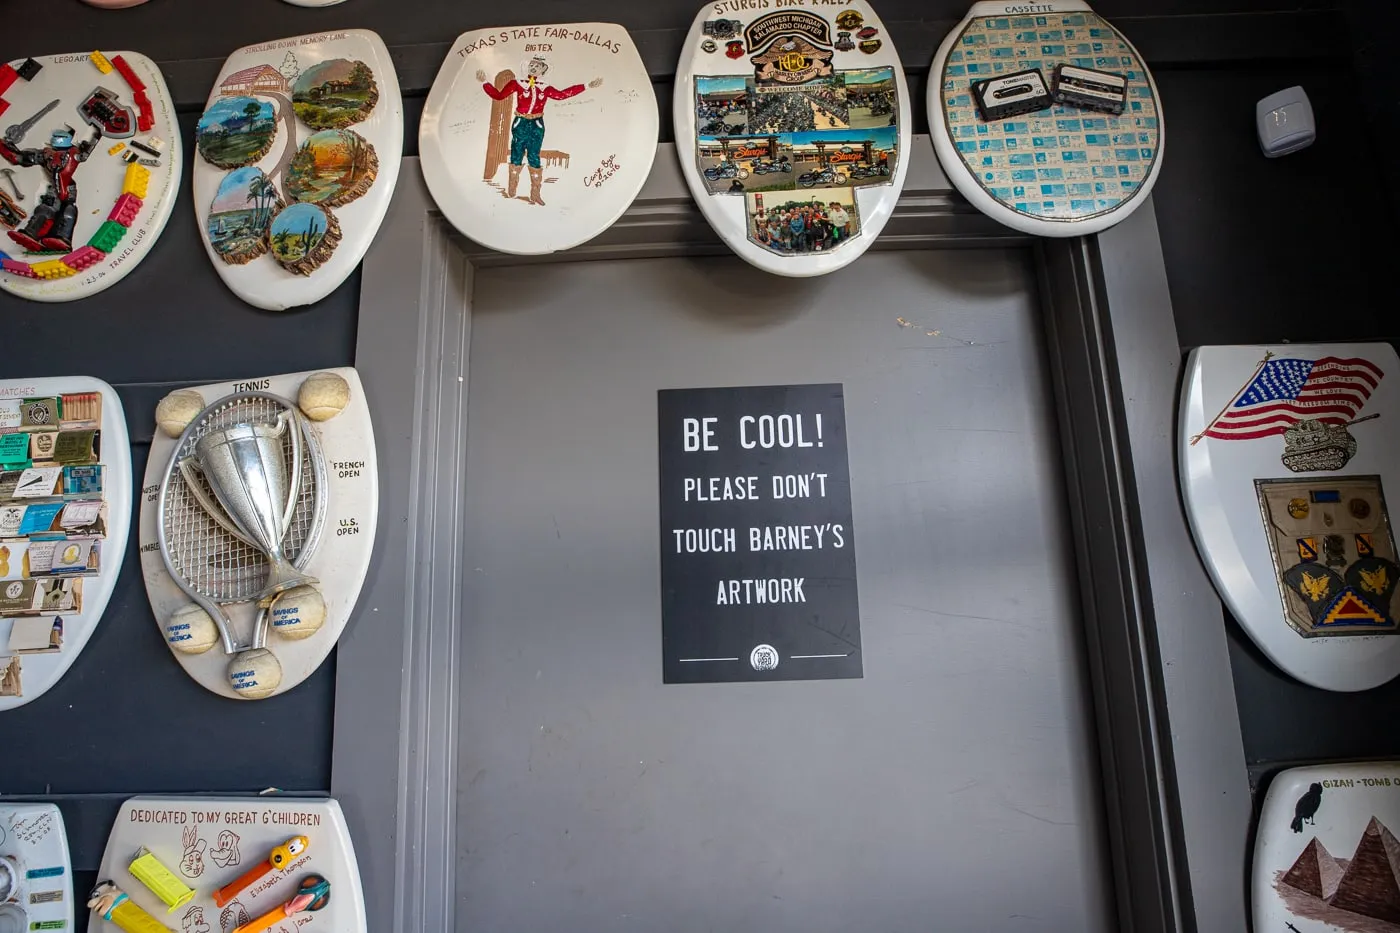 Be Cool Don't Touch Barney's Artwork sign - Barney Smith's Toilet Seat Art Museum in The Colony, Texas at The Truck Yard Bar